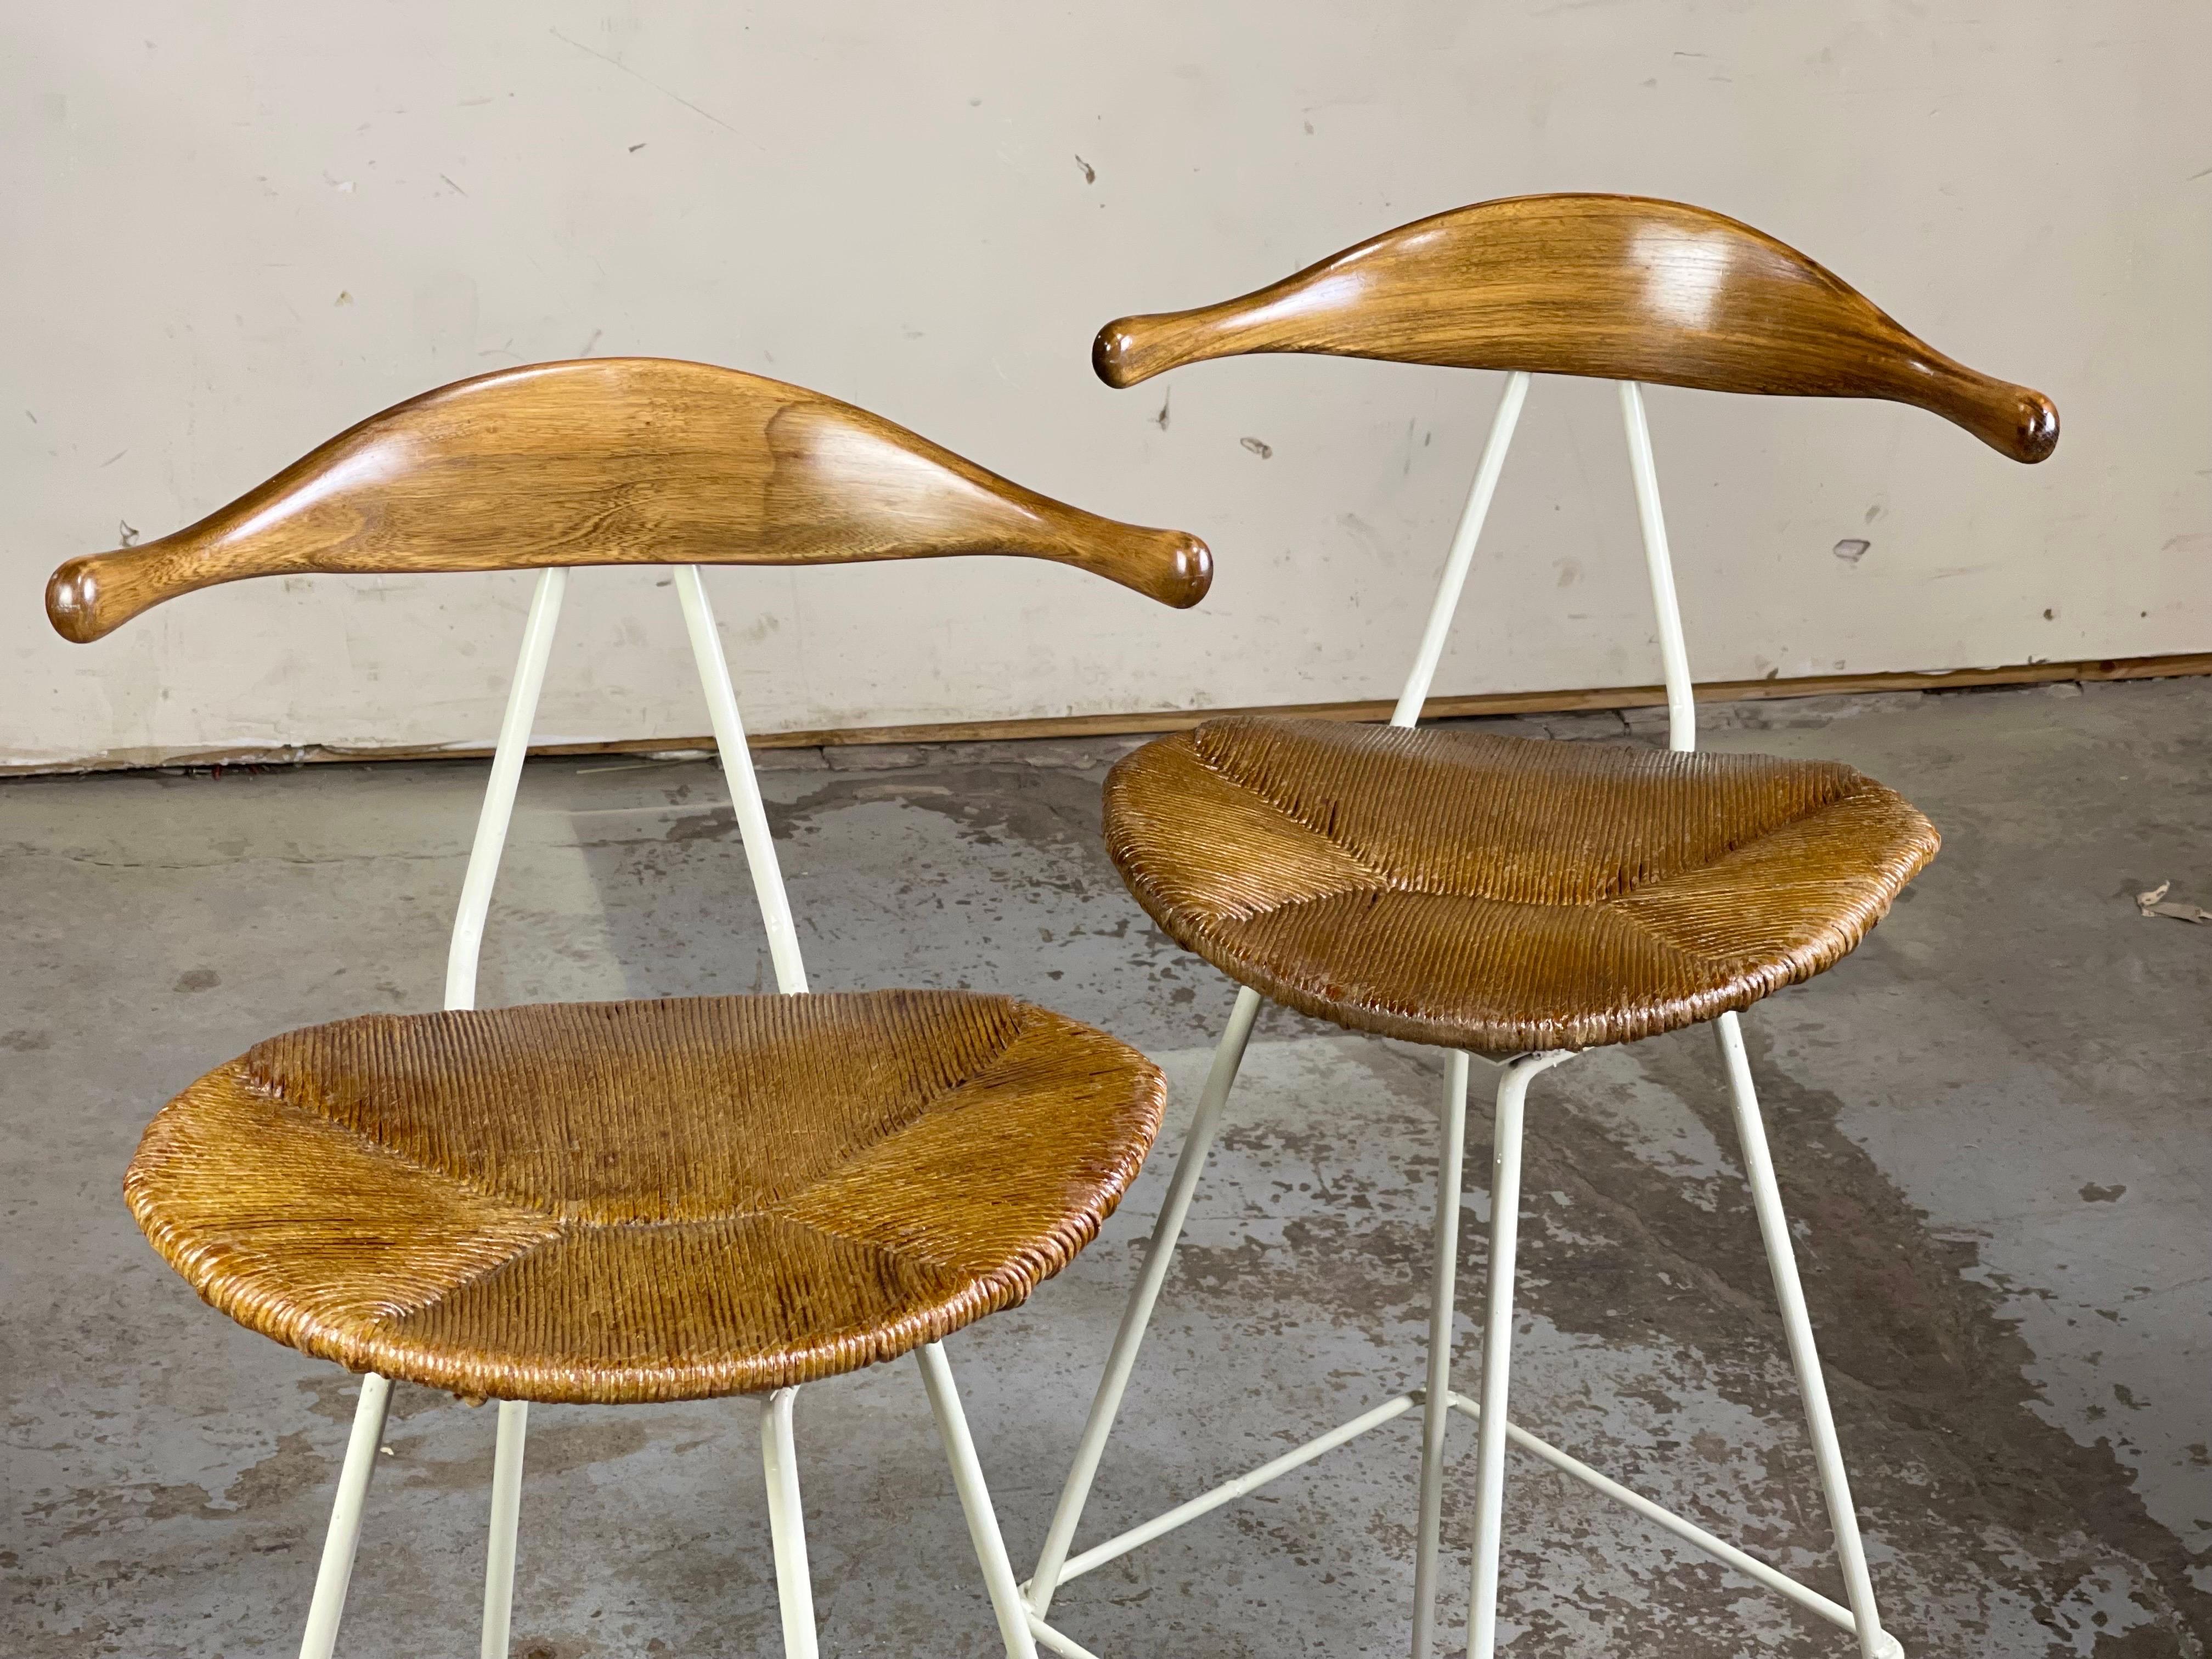 Very rare pair of Mid-Century Modern Cow-horn swivel Barstools by Arthur Umanoff - 1950's. I have seen this back before - but not on this base, which is a common base for Umanoff. I think this base combo looks incredible. Much better than Hans